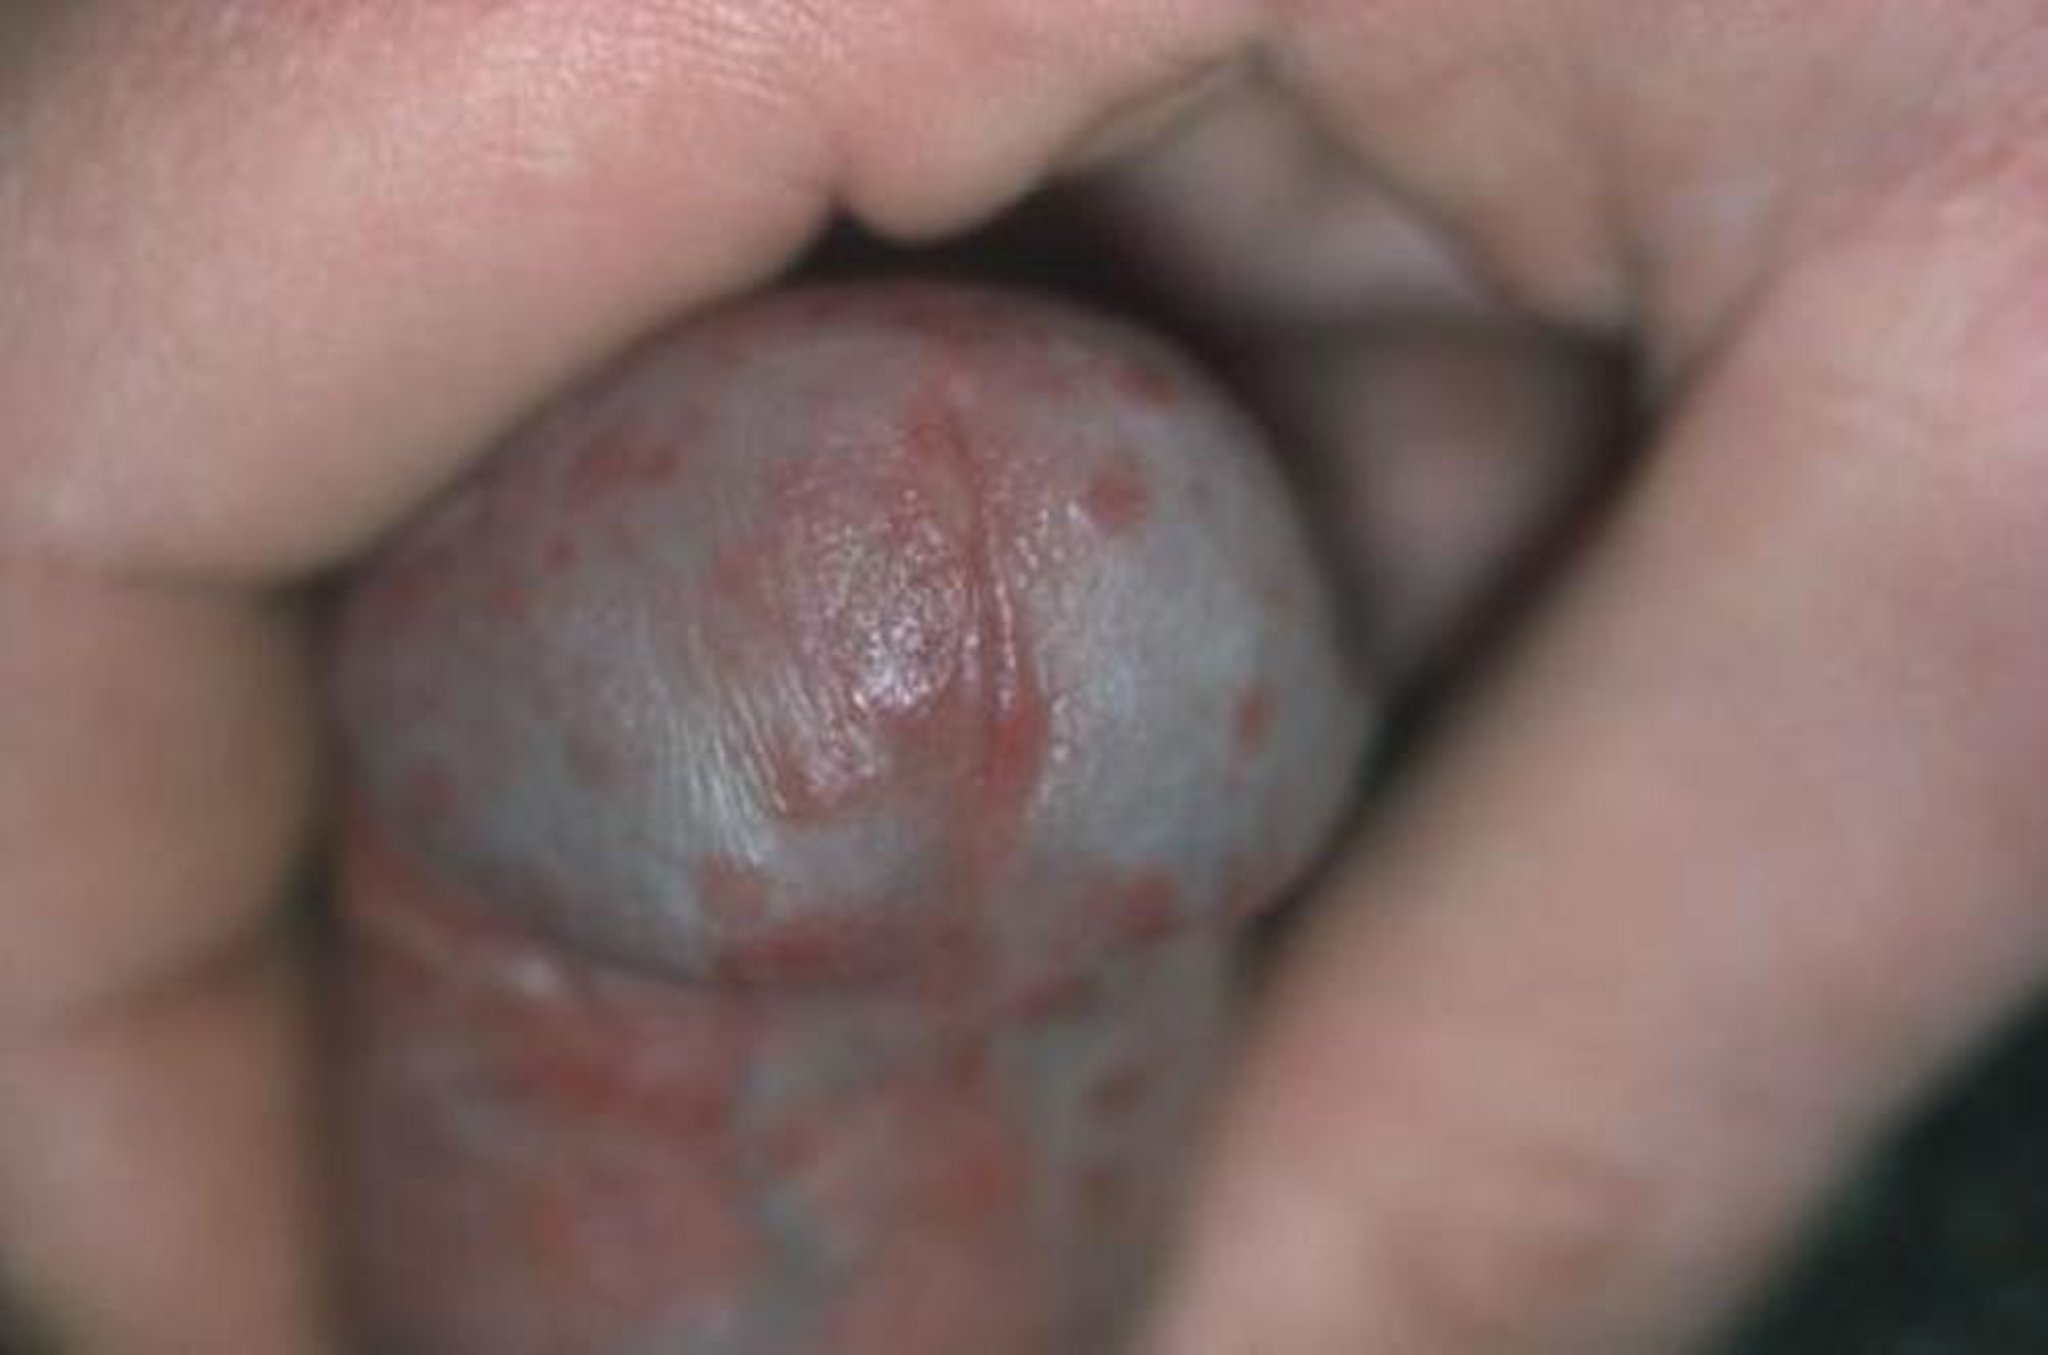 Penile Squamous Cell Carcinoma in Situ (Formerly Bowen Disease)